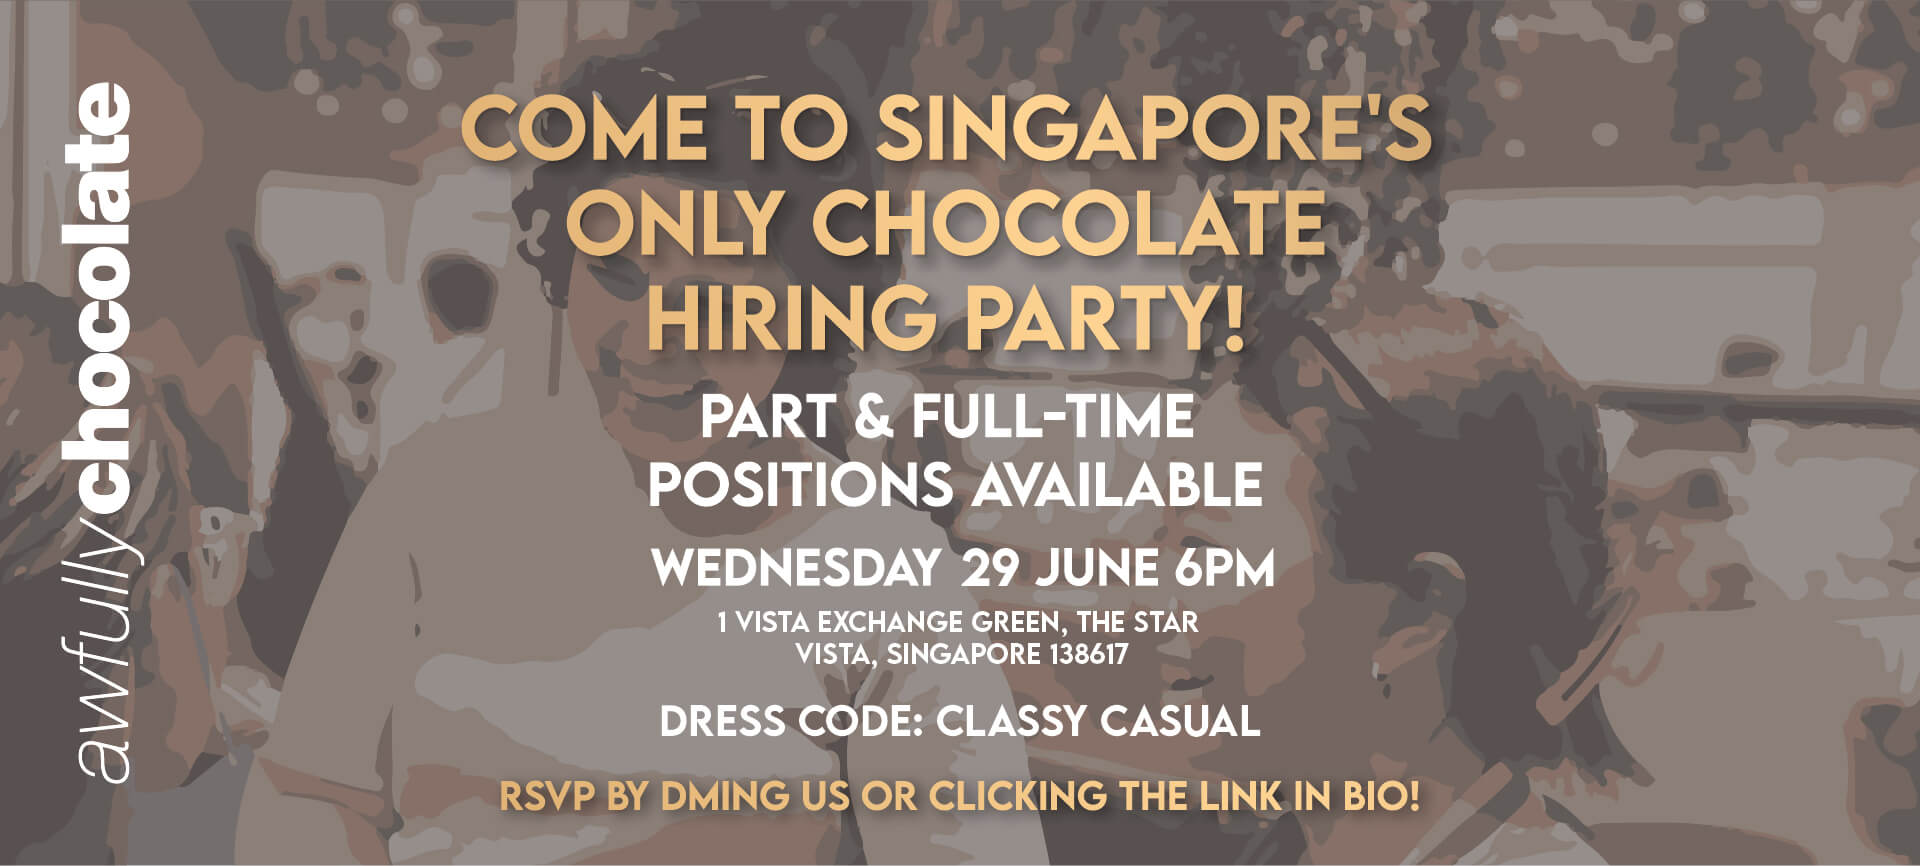 chocolate-hiring-party-01-1-